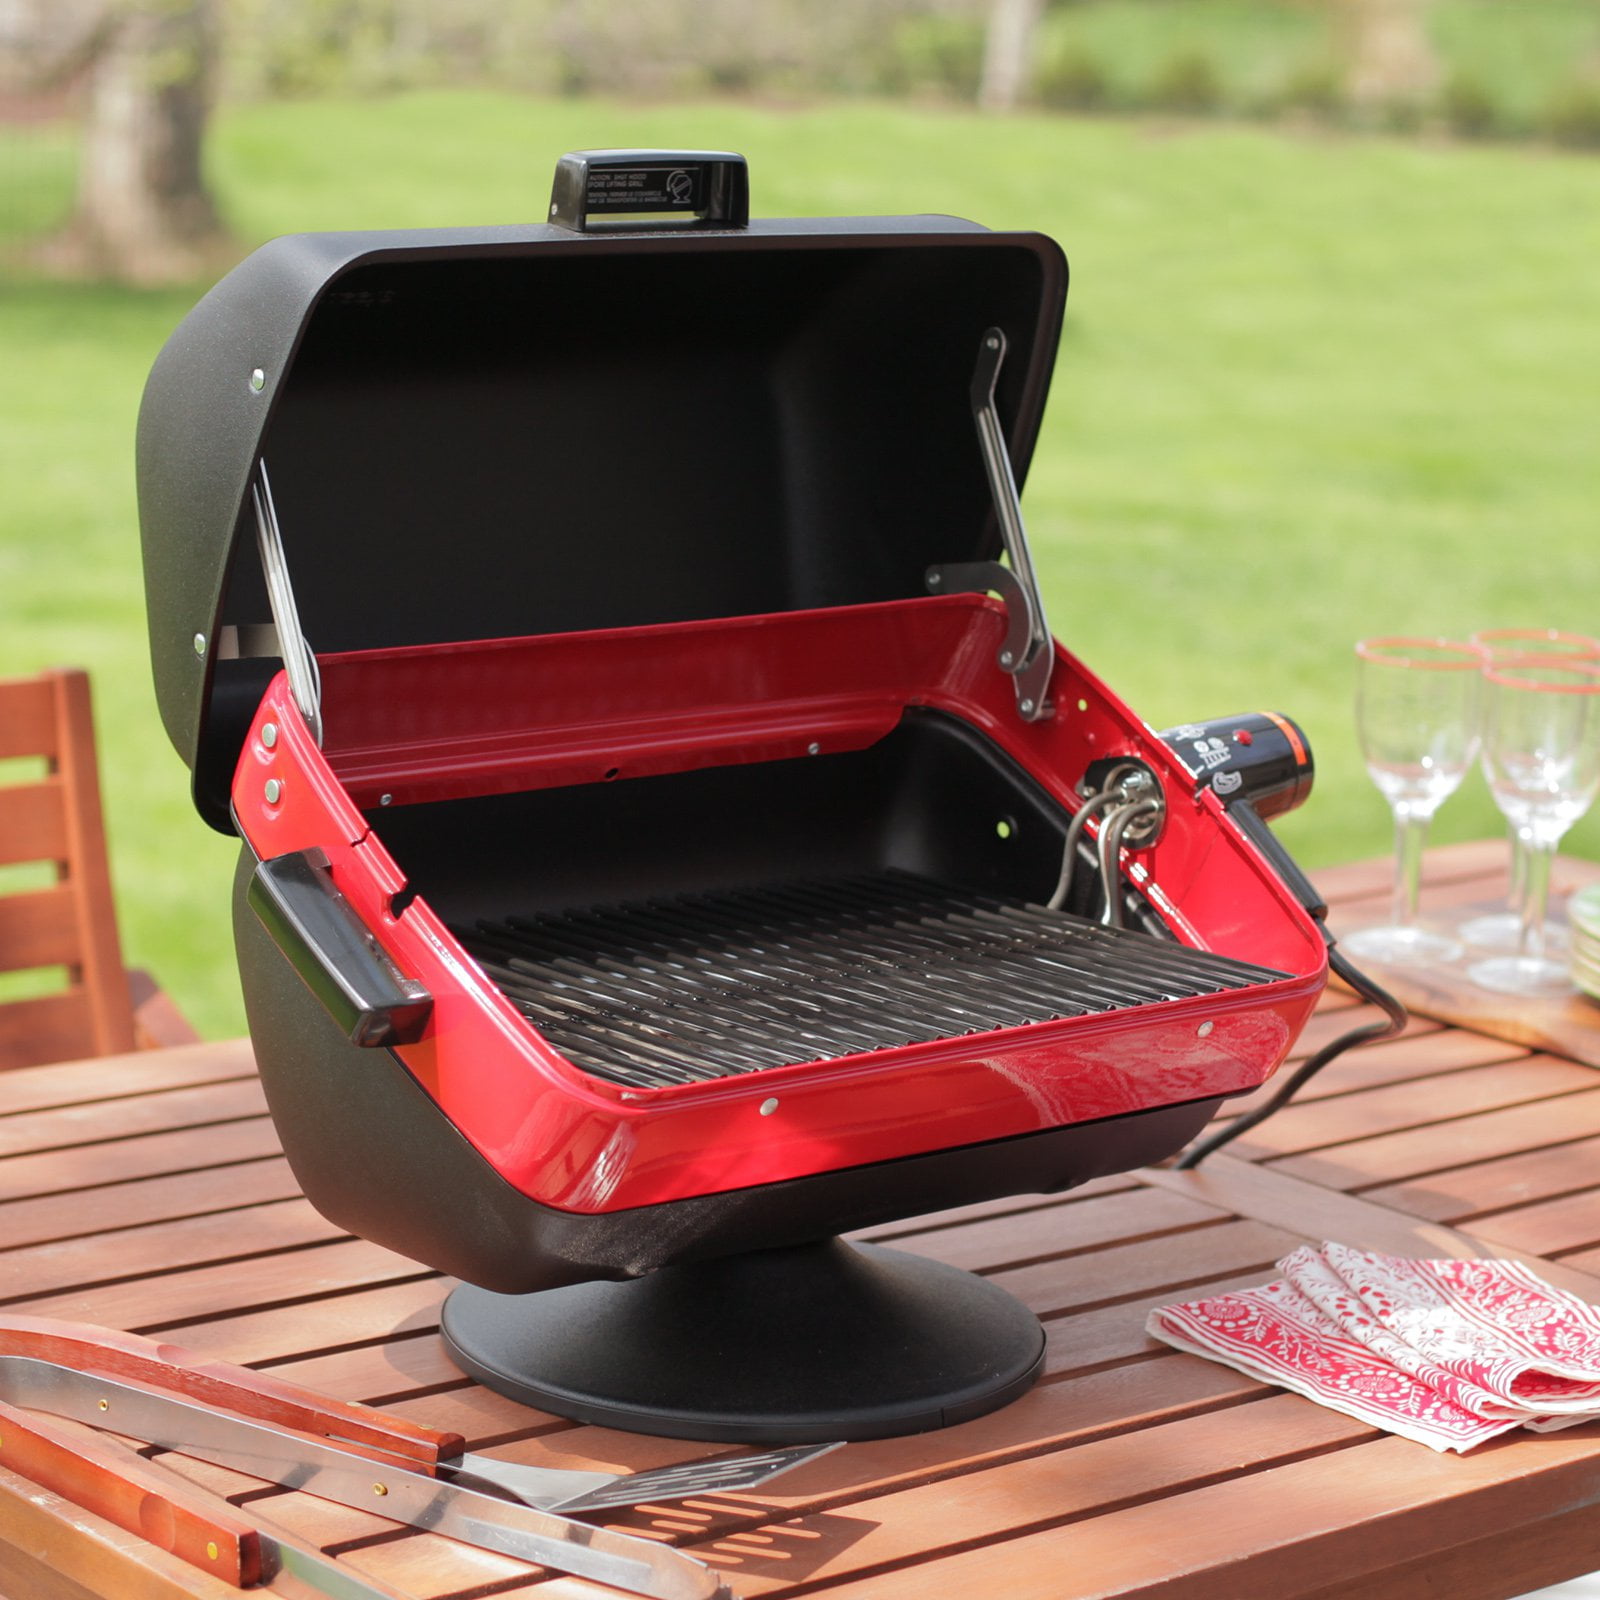 Americana Electric Tabletop Grill with 3-position element-Model 9300U8.181  – MECO